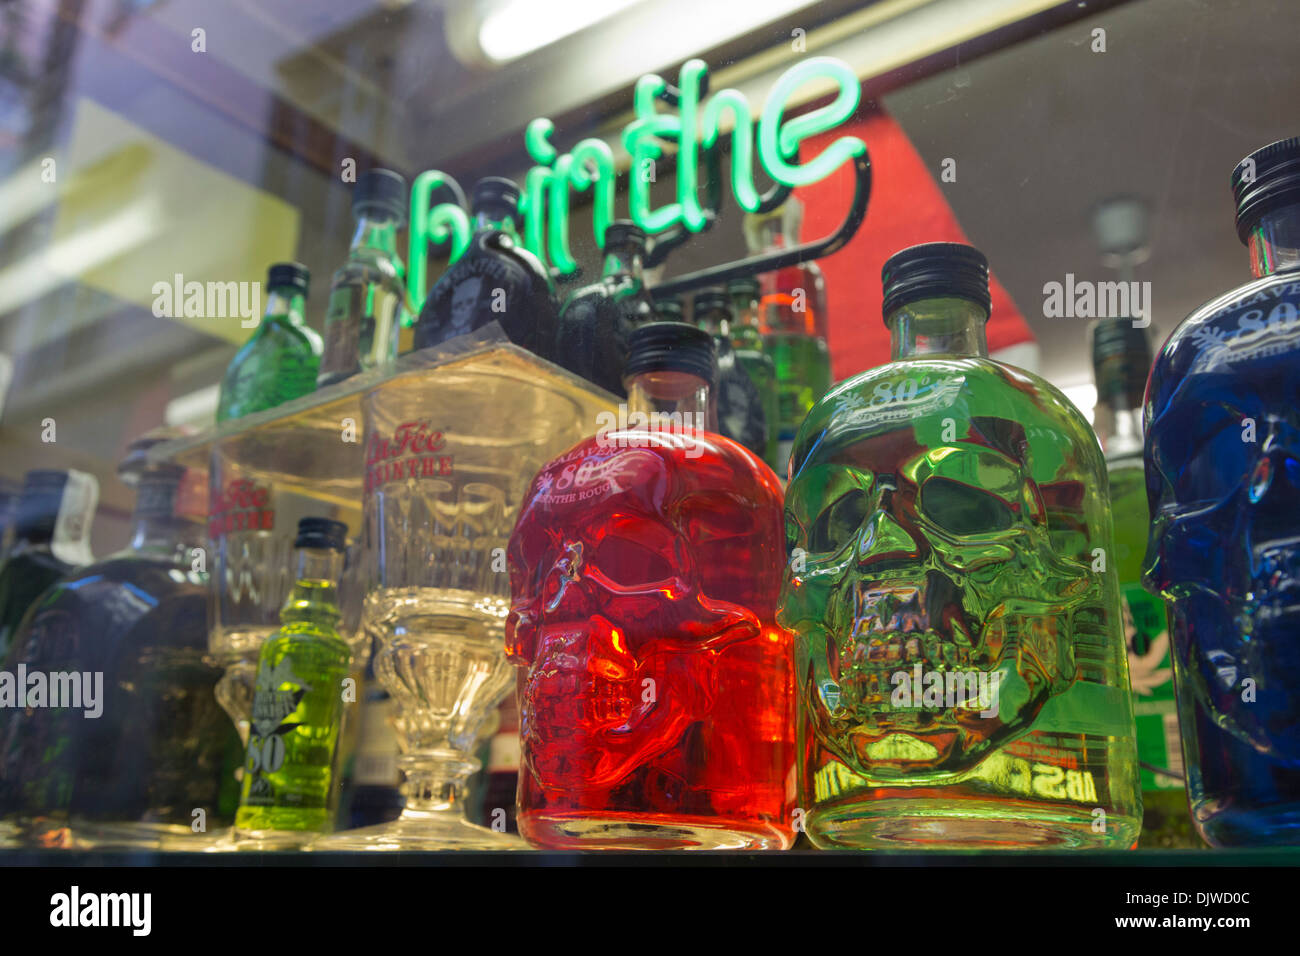 Absinthe bottles in the shape of skulls in a shop window Absinthe in the historic centre of Rome, Italy. Stock Photo